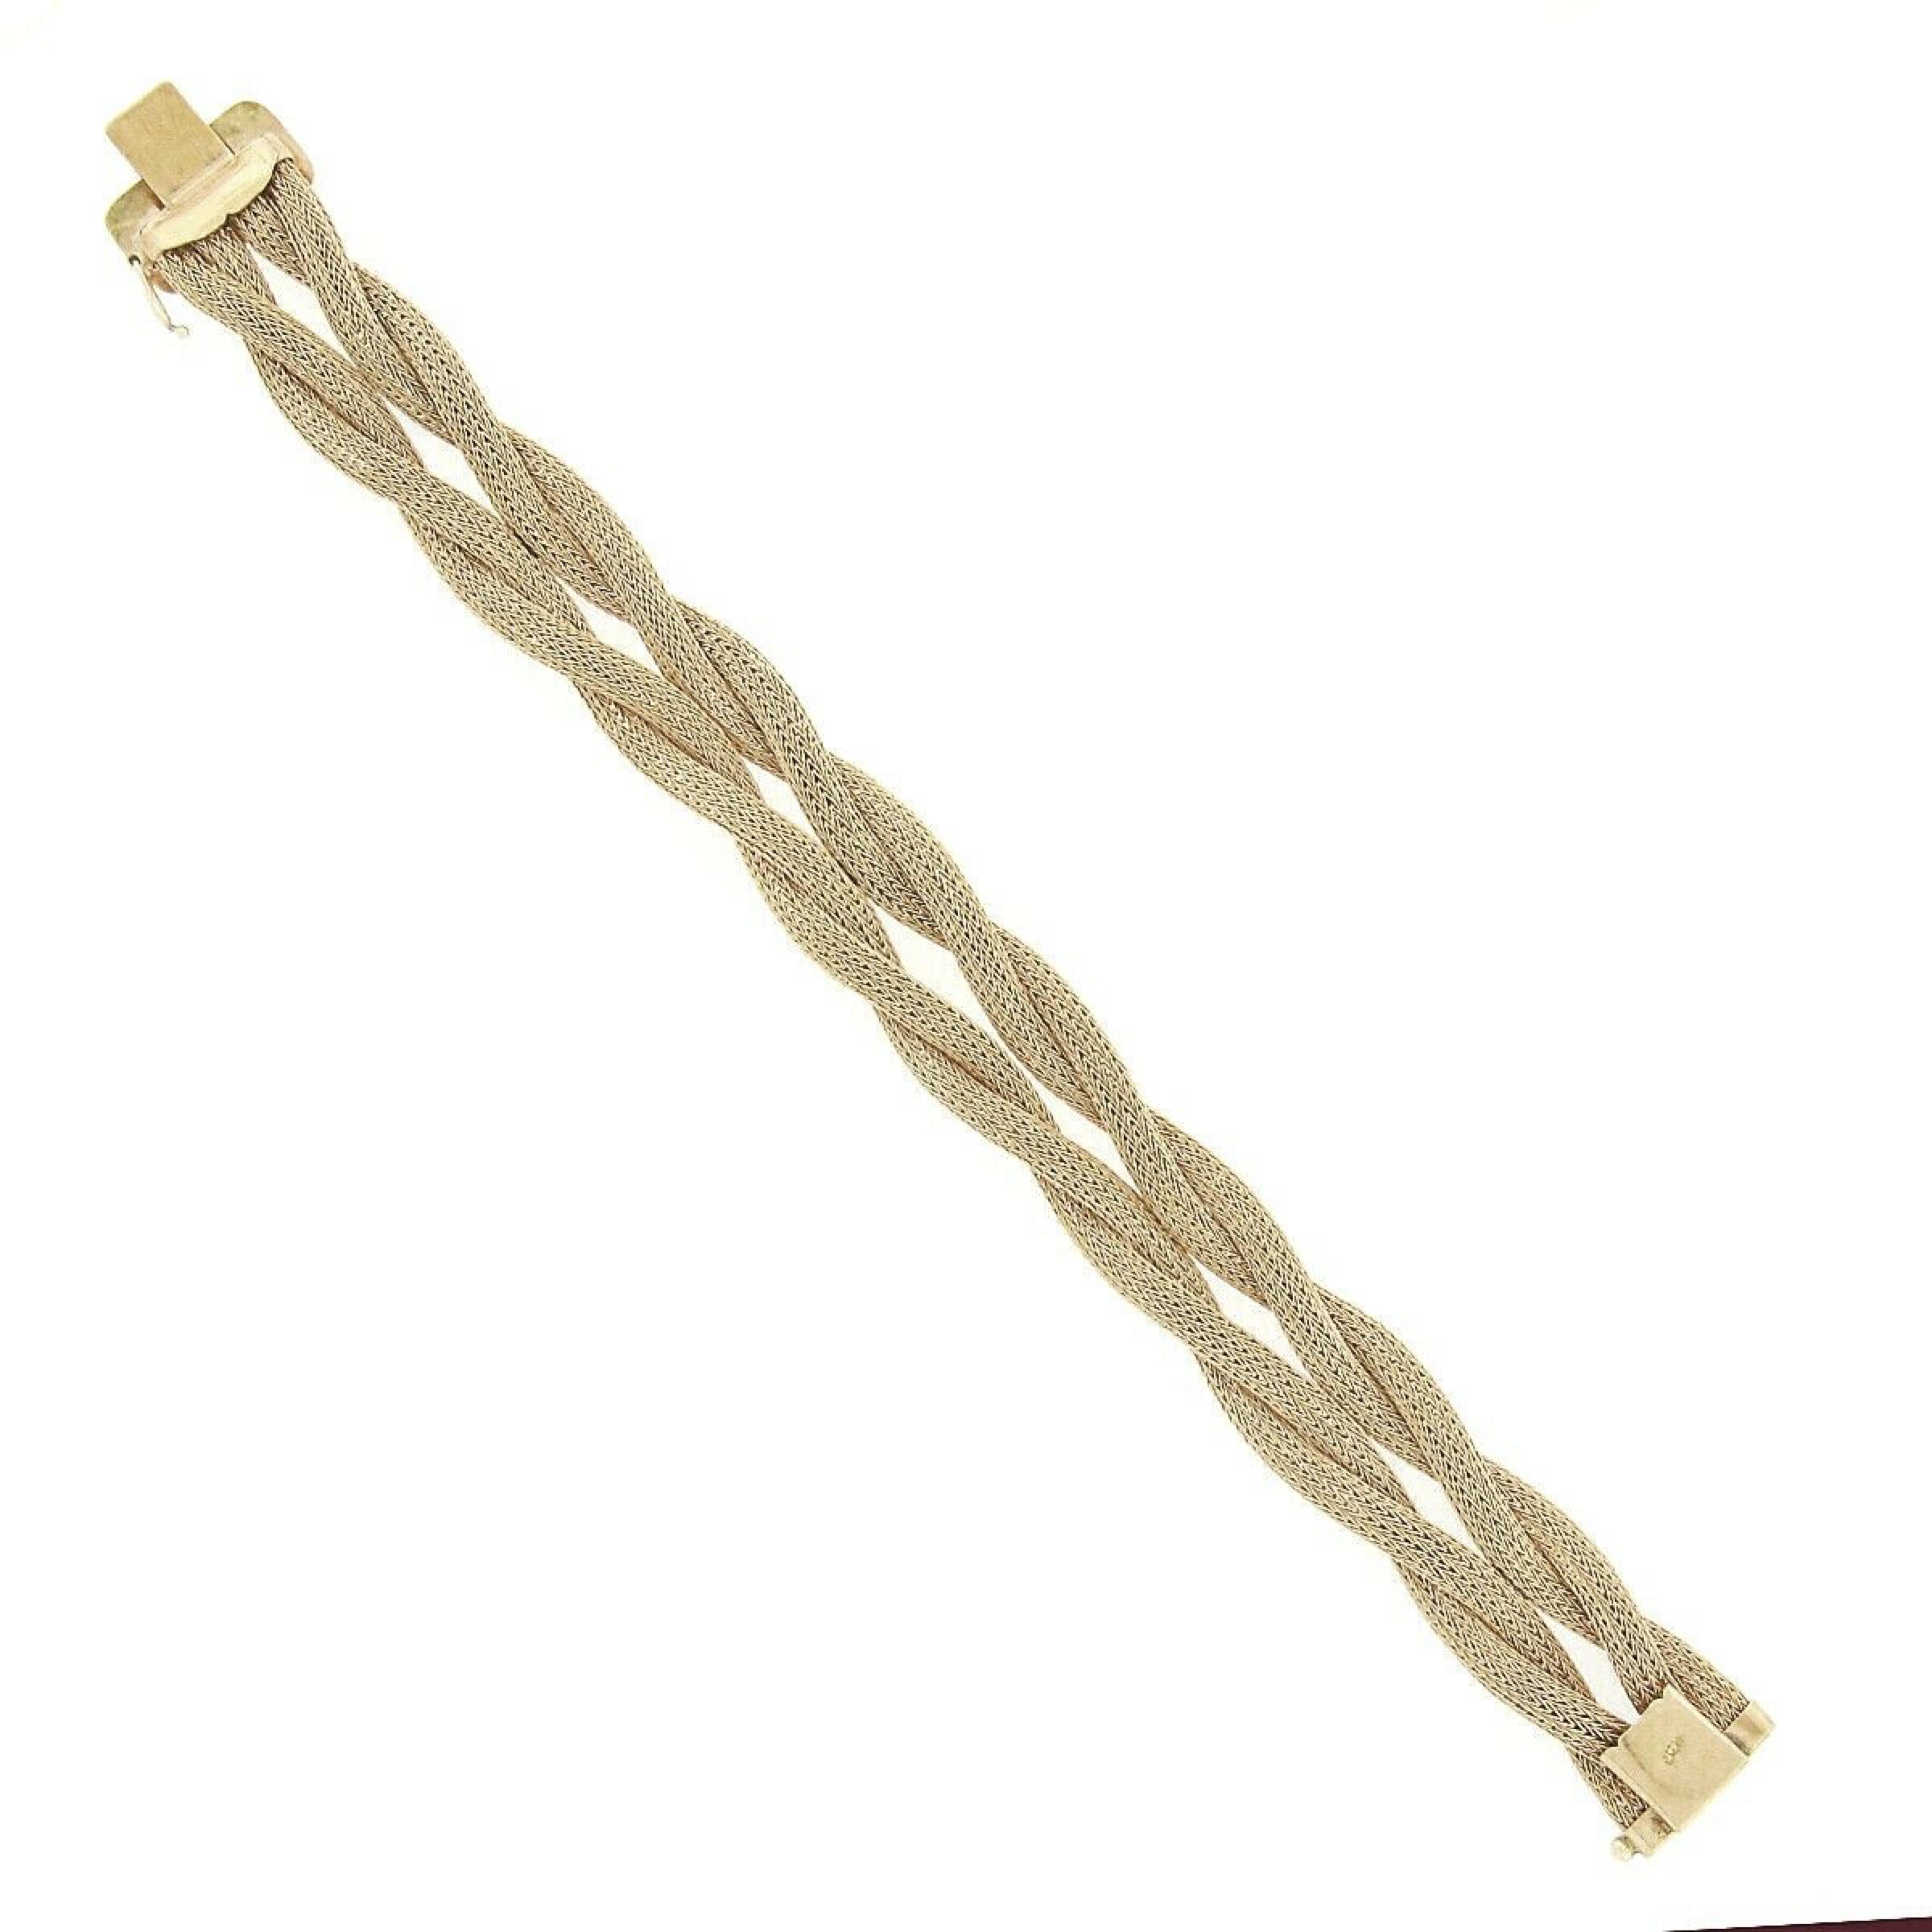 Vintage 14k Rose Gold Woven Braided Wide Mesh Link Chain Engraved Clasp Bracelet 4